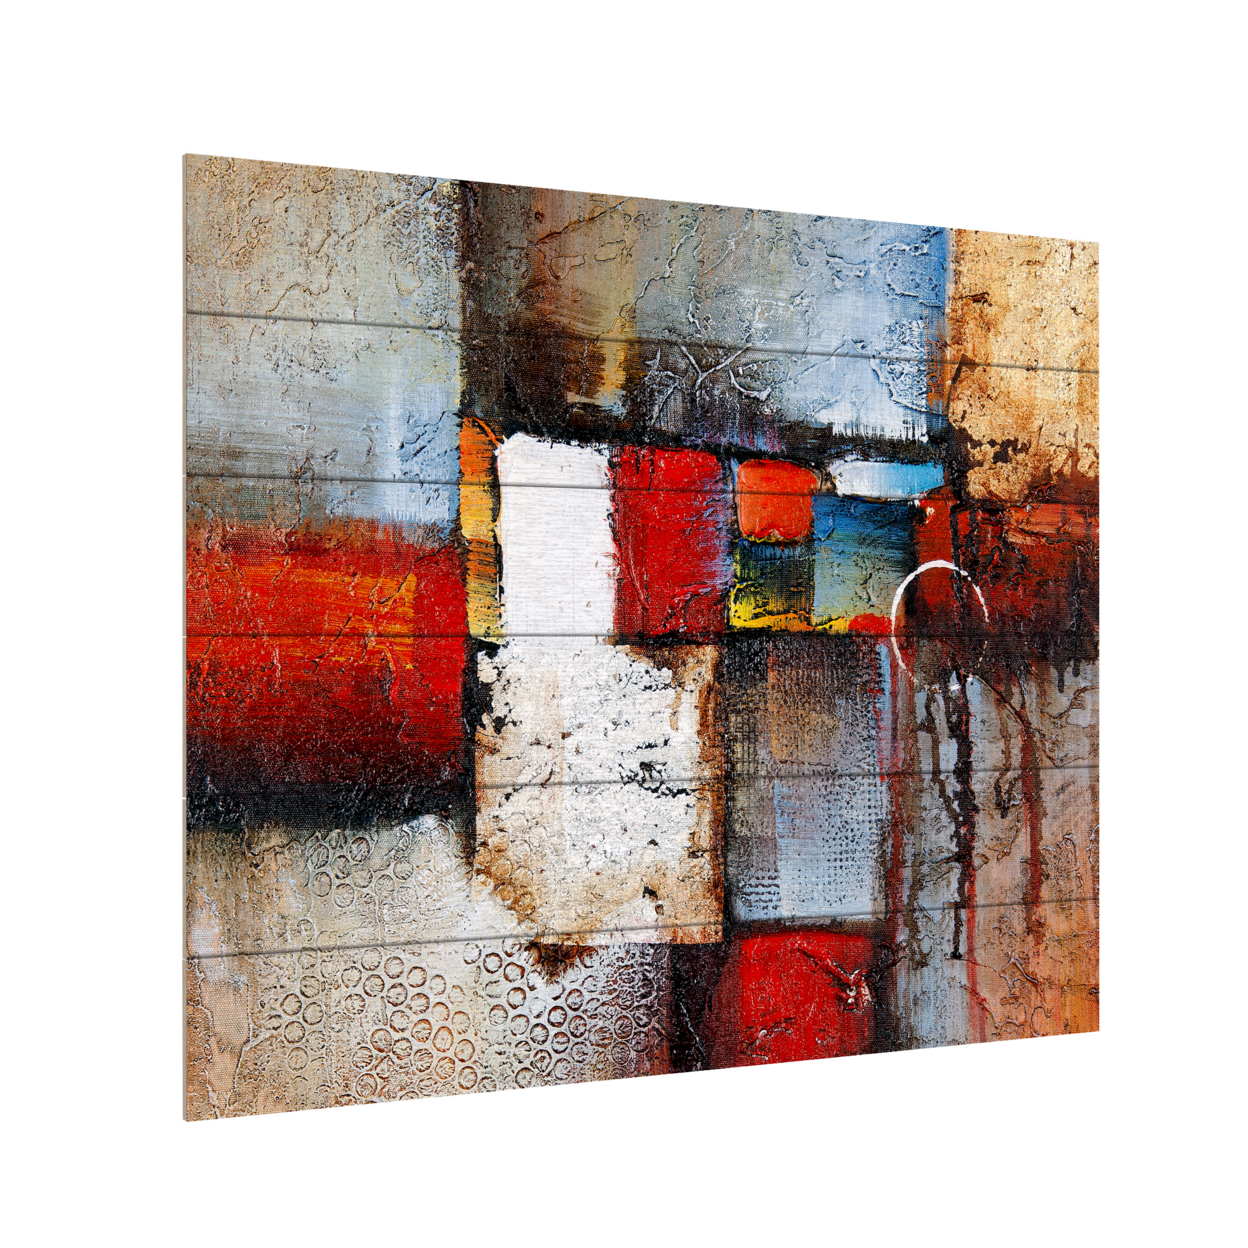 Wooden Slat Art 18 X 22 Inches Titled Cube Abstract VI Ready To Hang Home Decor Picture